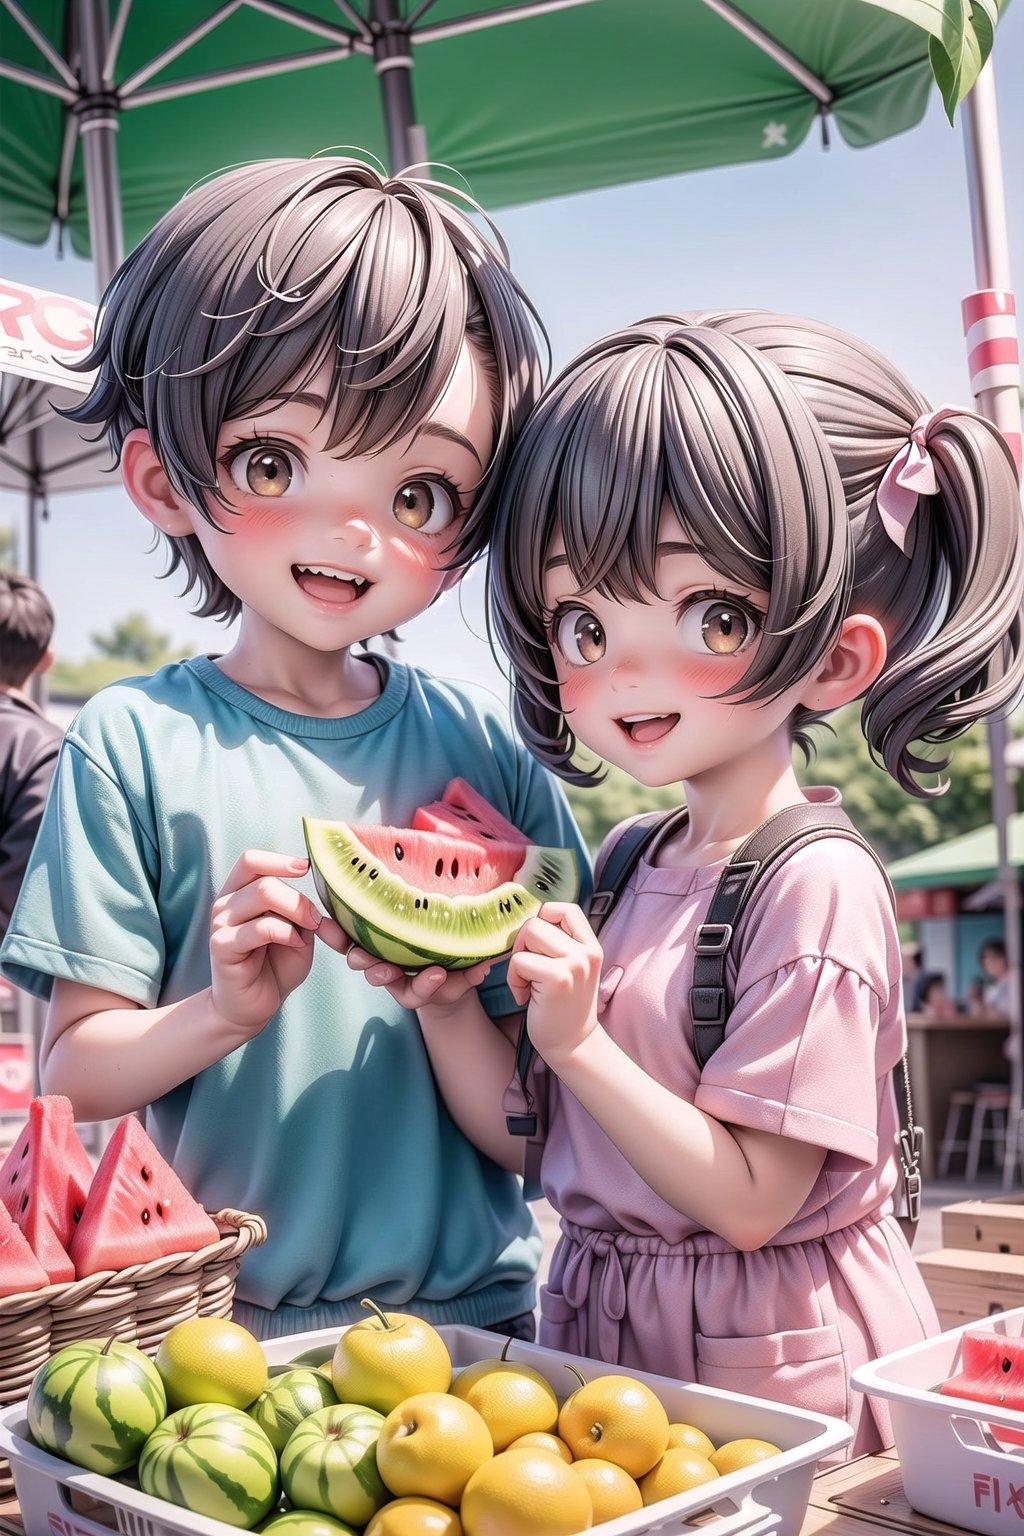 3D, one boy and one girl, brown eyes, brown hair, Korean, create a mischievous image of two children eating watermelon in front of a fruit stand in Shinhae City, happy, smiling, making eye contact with the viewer